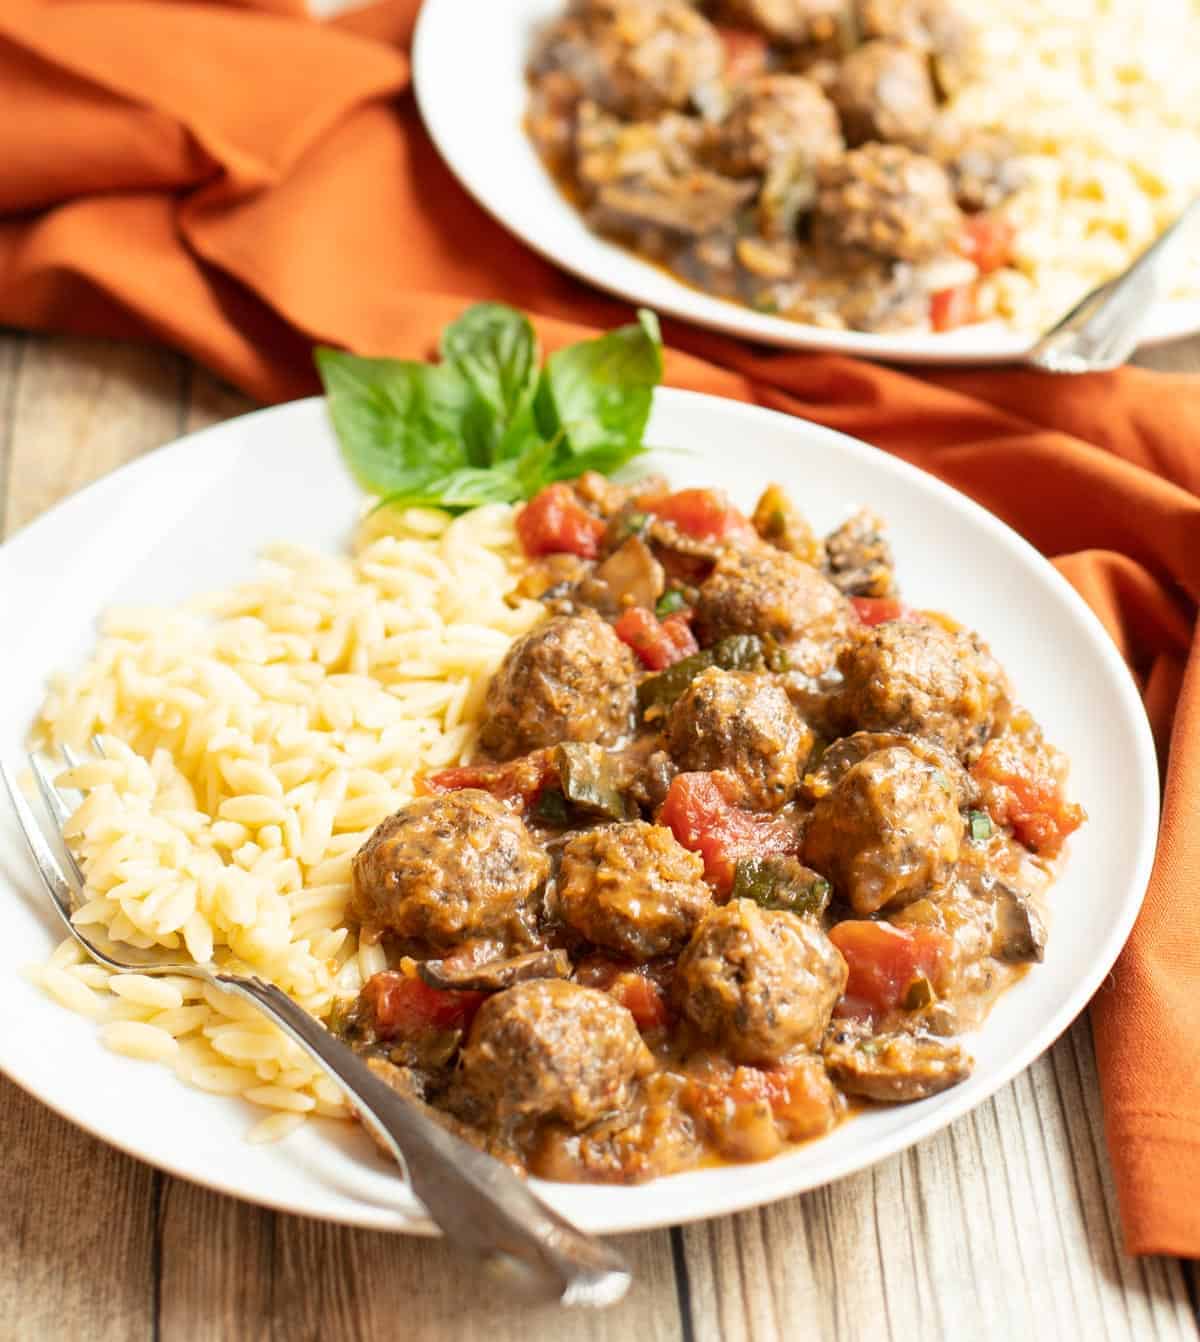 Delicious meatballs made with ground sausage, served in a rich tomato sauce on a plate.